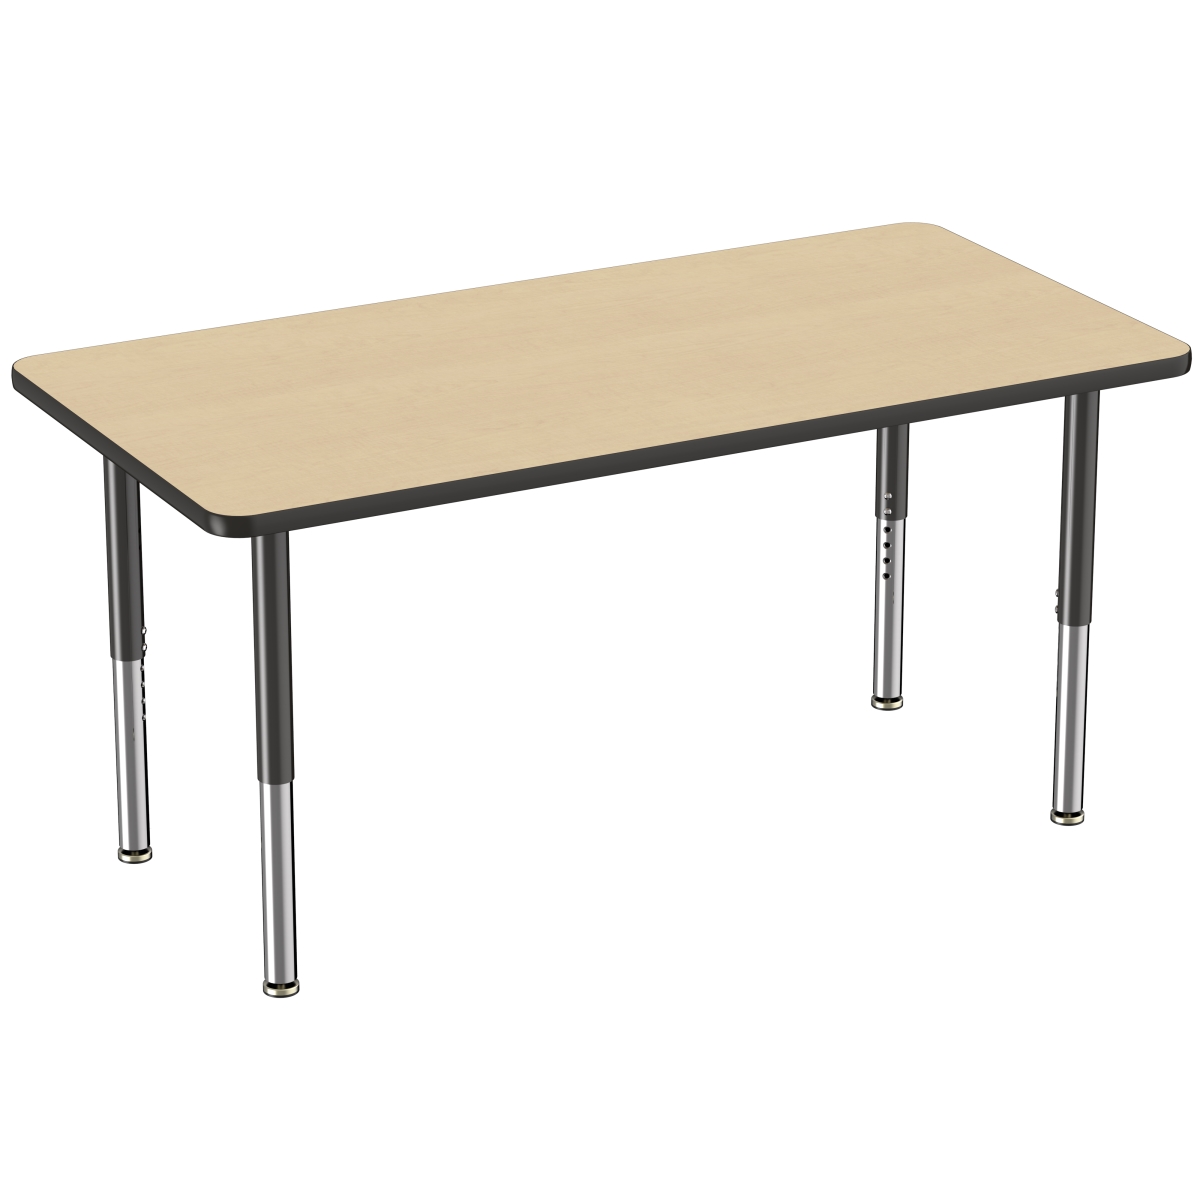 10026-mpbk 30 X 60 In. Rectangle T-mold Adjustable Activity Table With Super Leg - Maple & Black